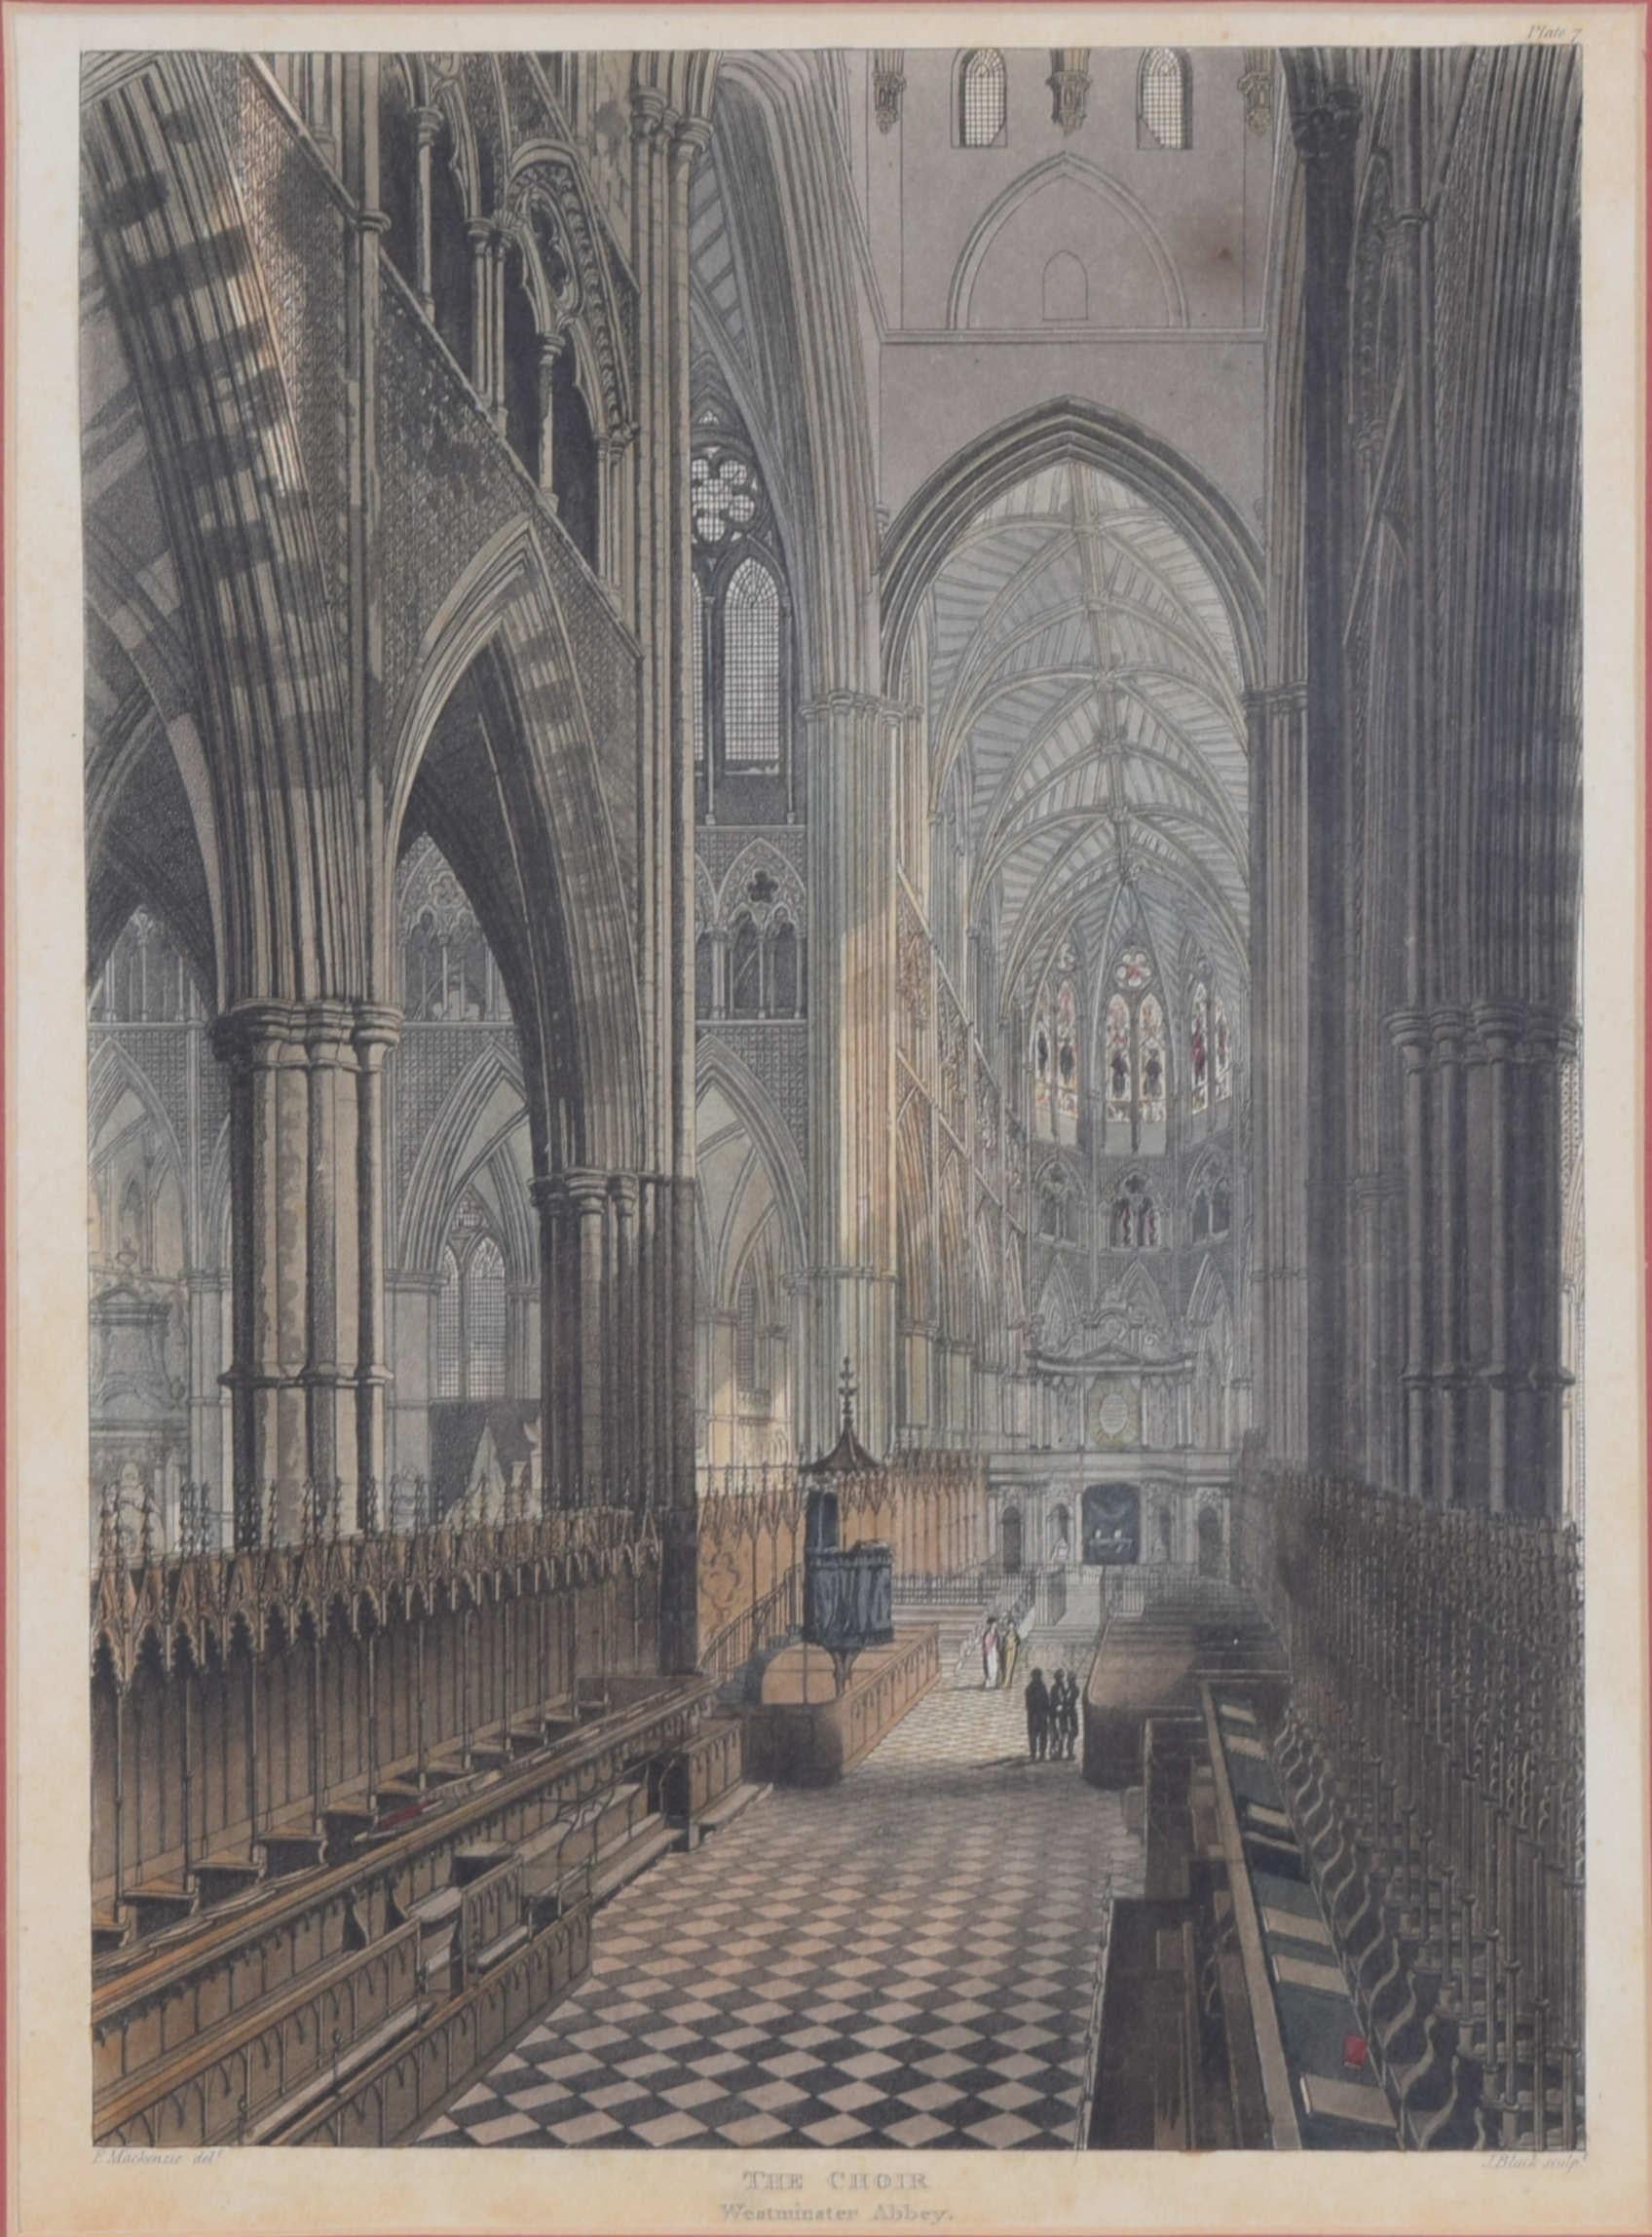 The Choir of Westminster Abbey engraving by J Black for Ackermann - Print by Rudolph Ackermann